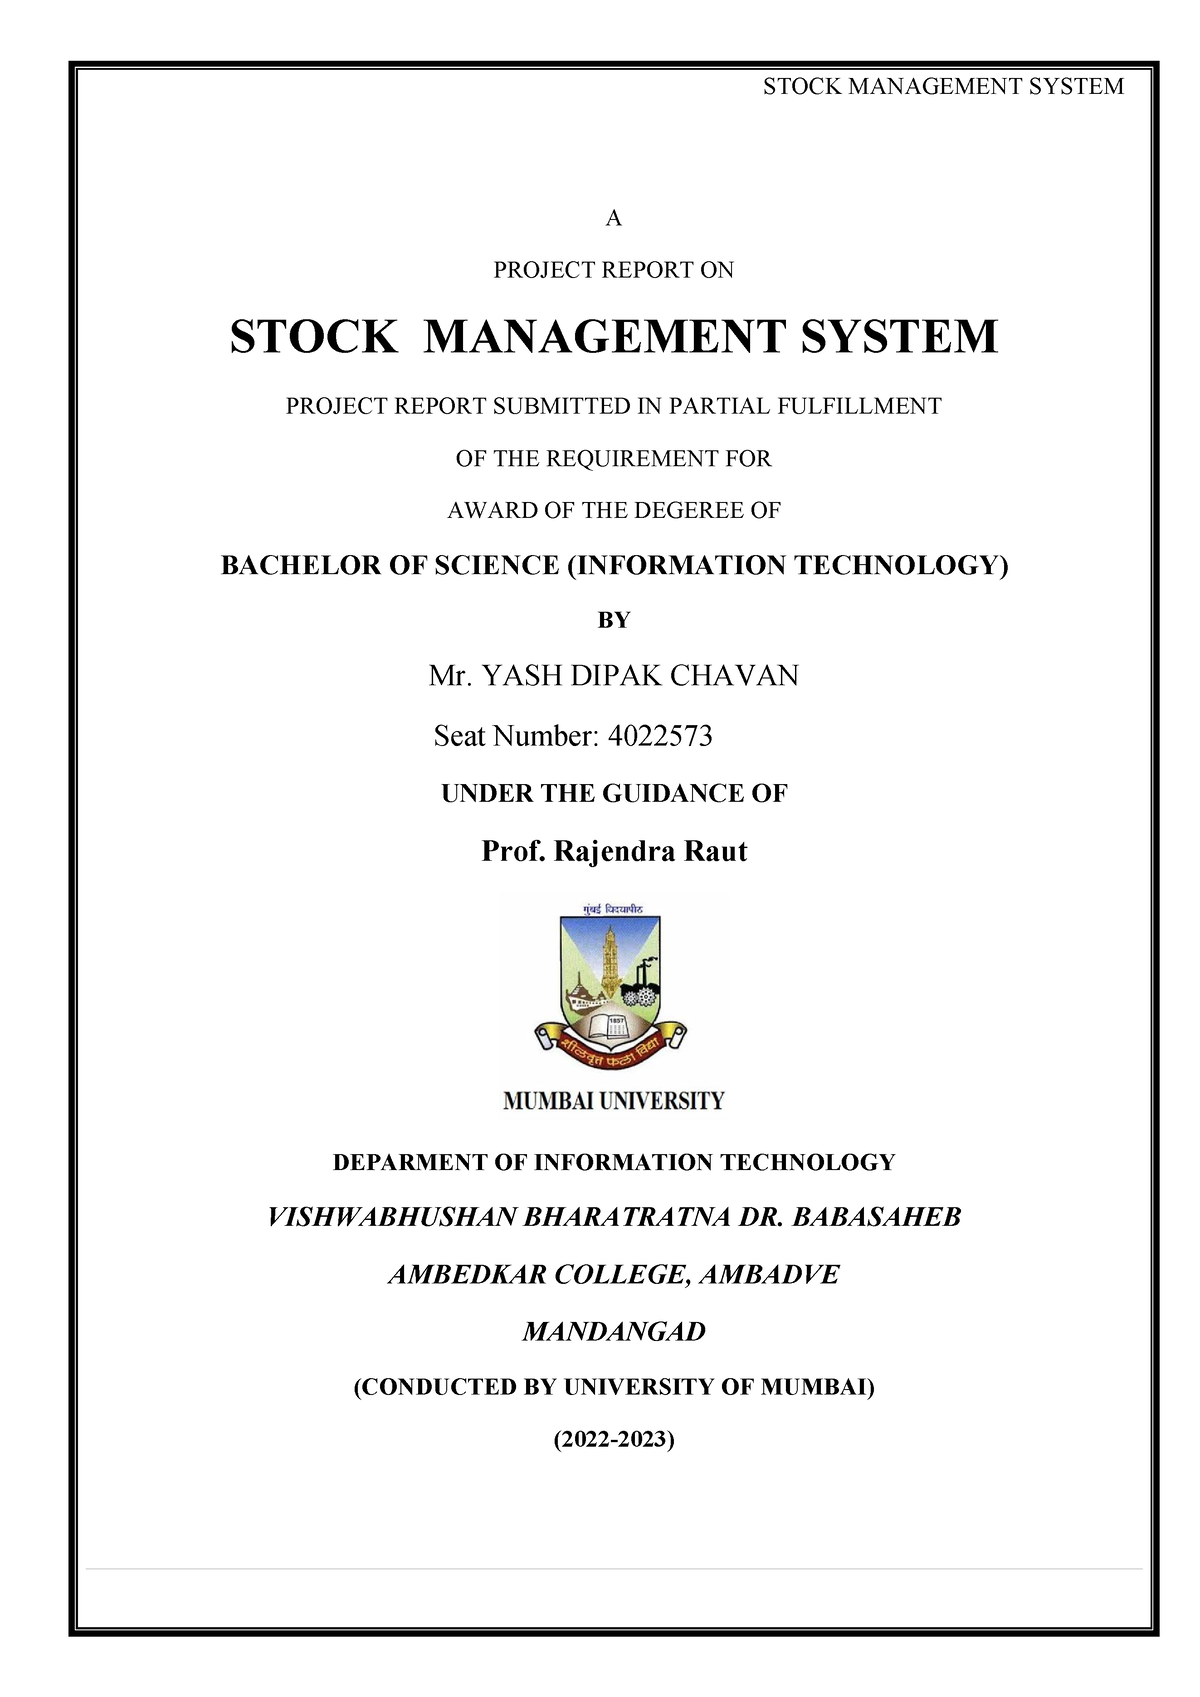 how to write project report on stock market